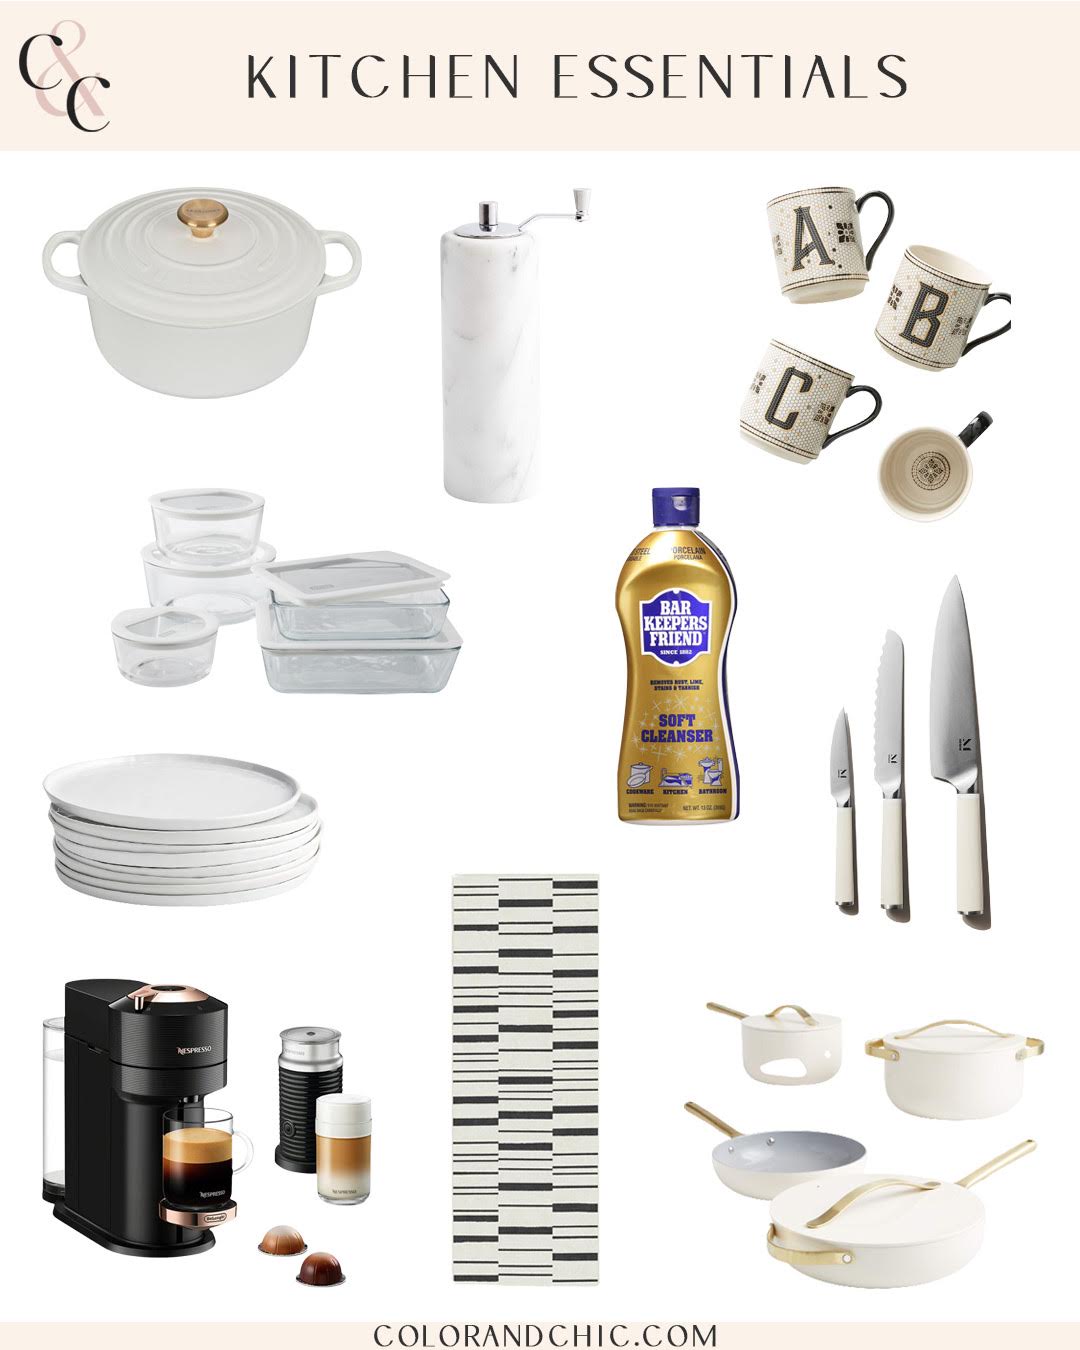 Kitchen Essentials I Love in My Home - Color & Chic